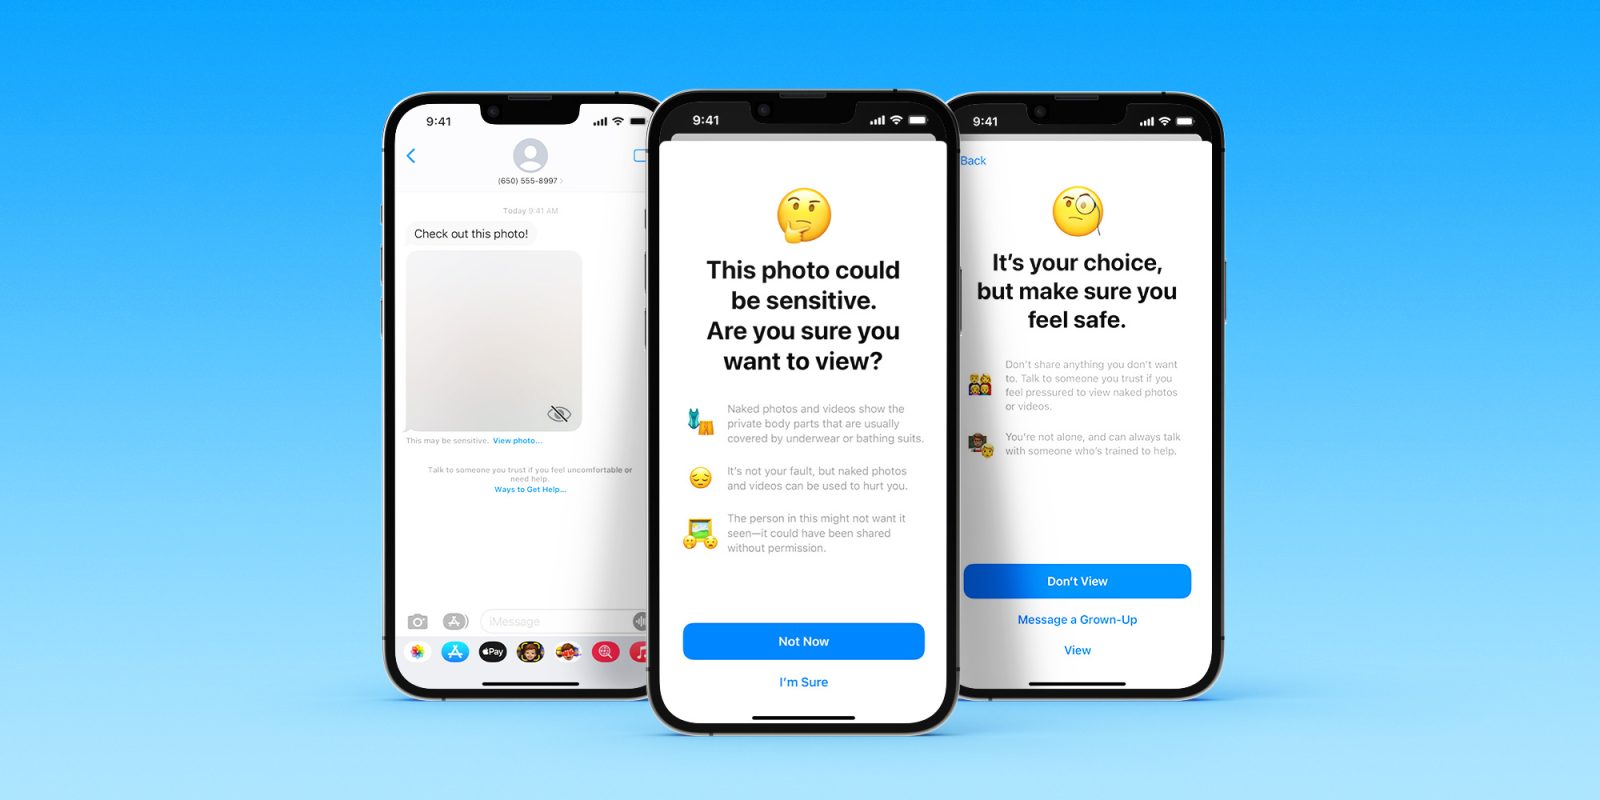 iOS 15.5 expands Communication Safety in Messages to these countries